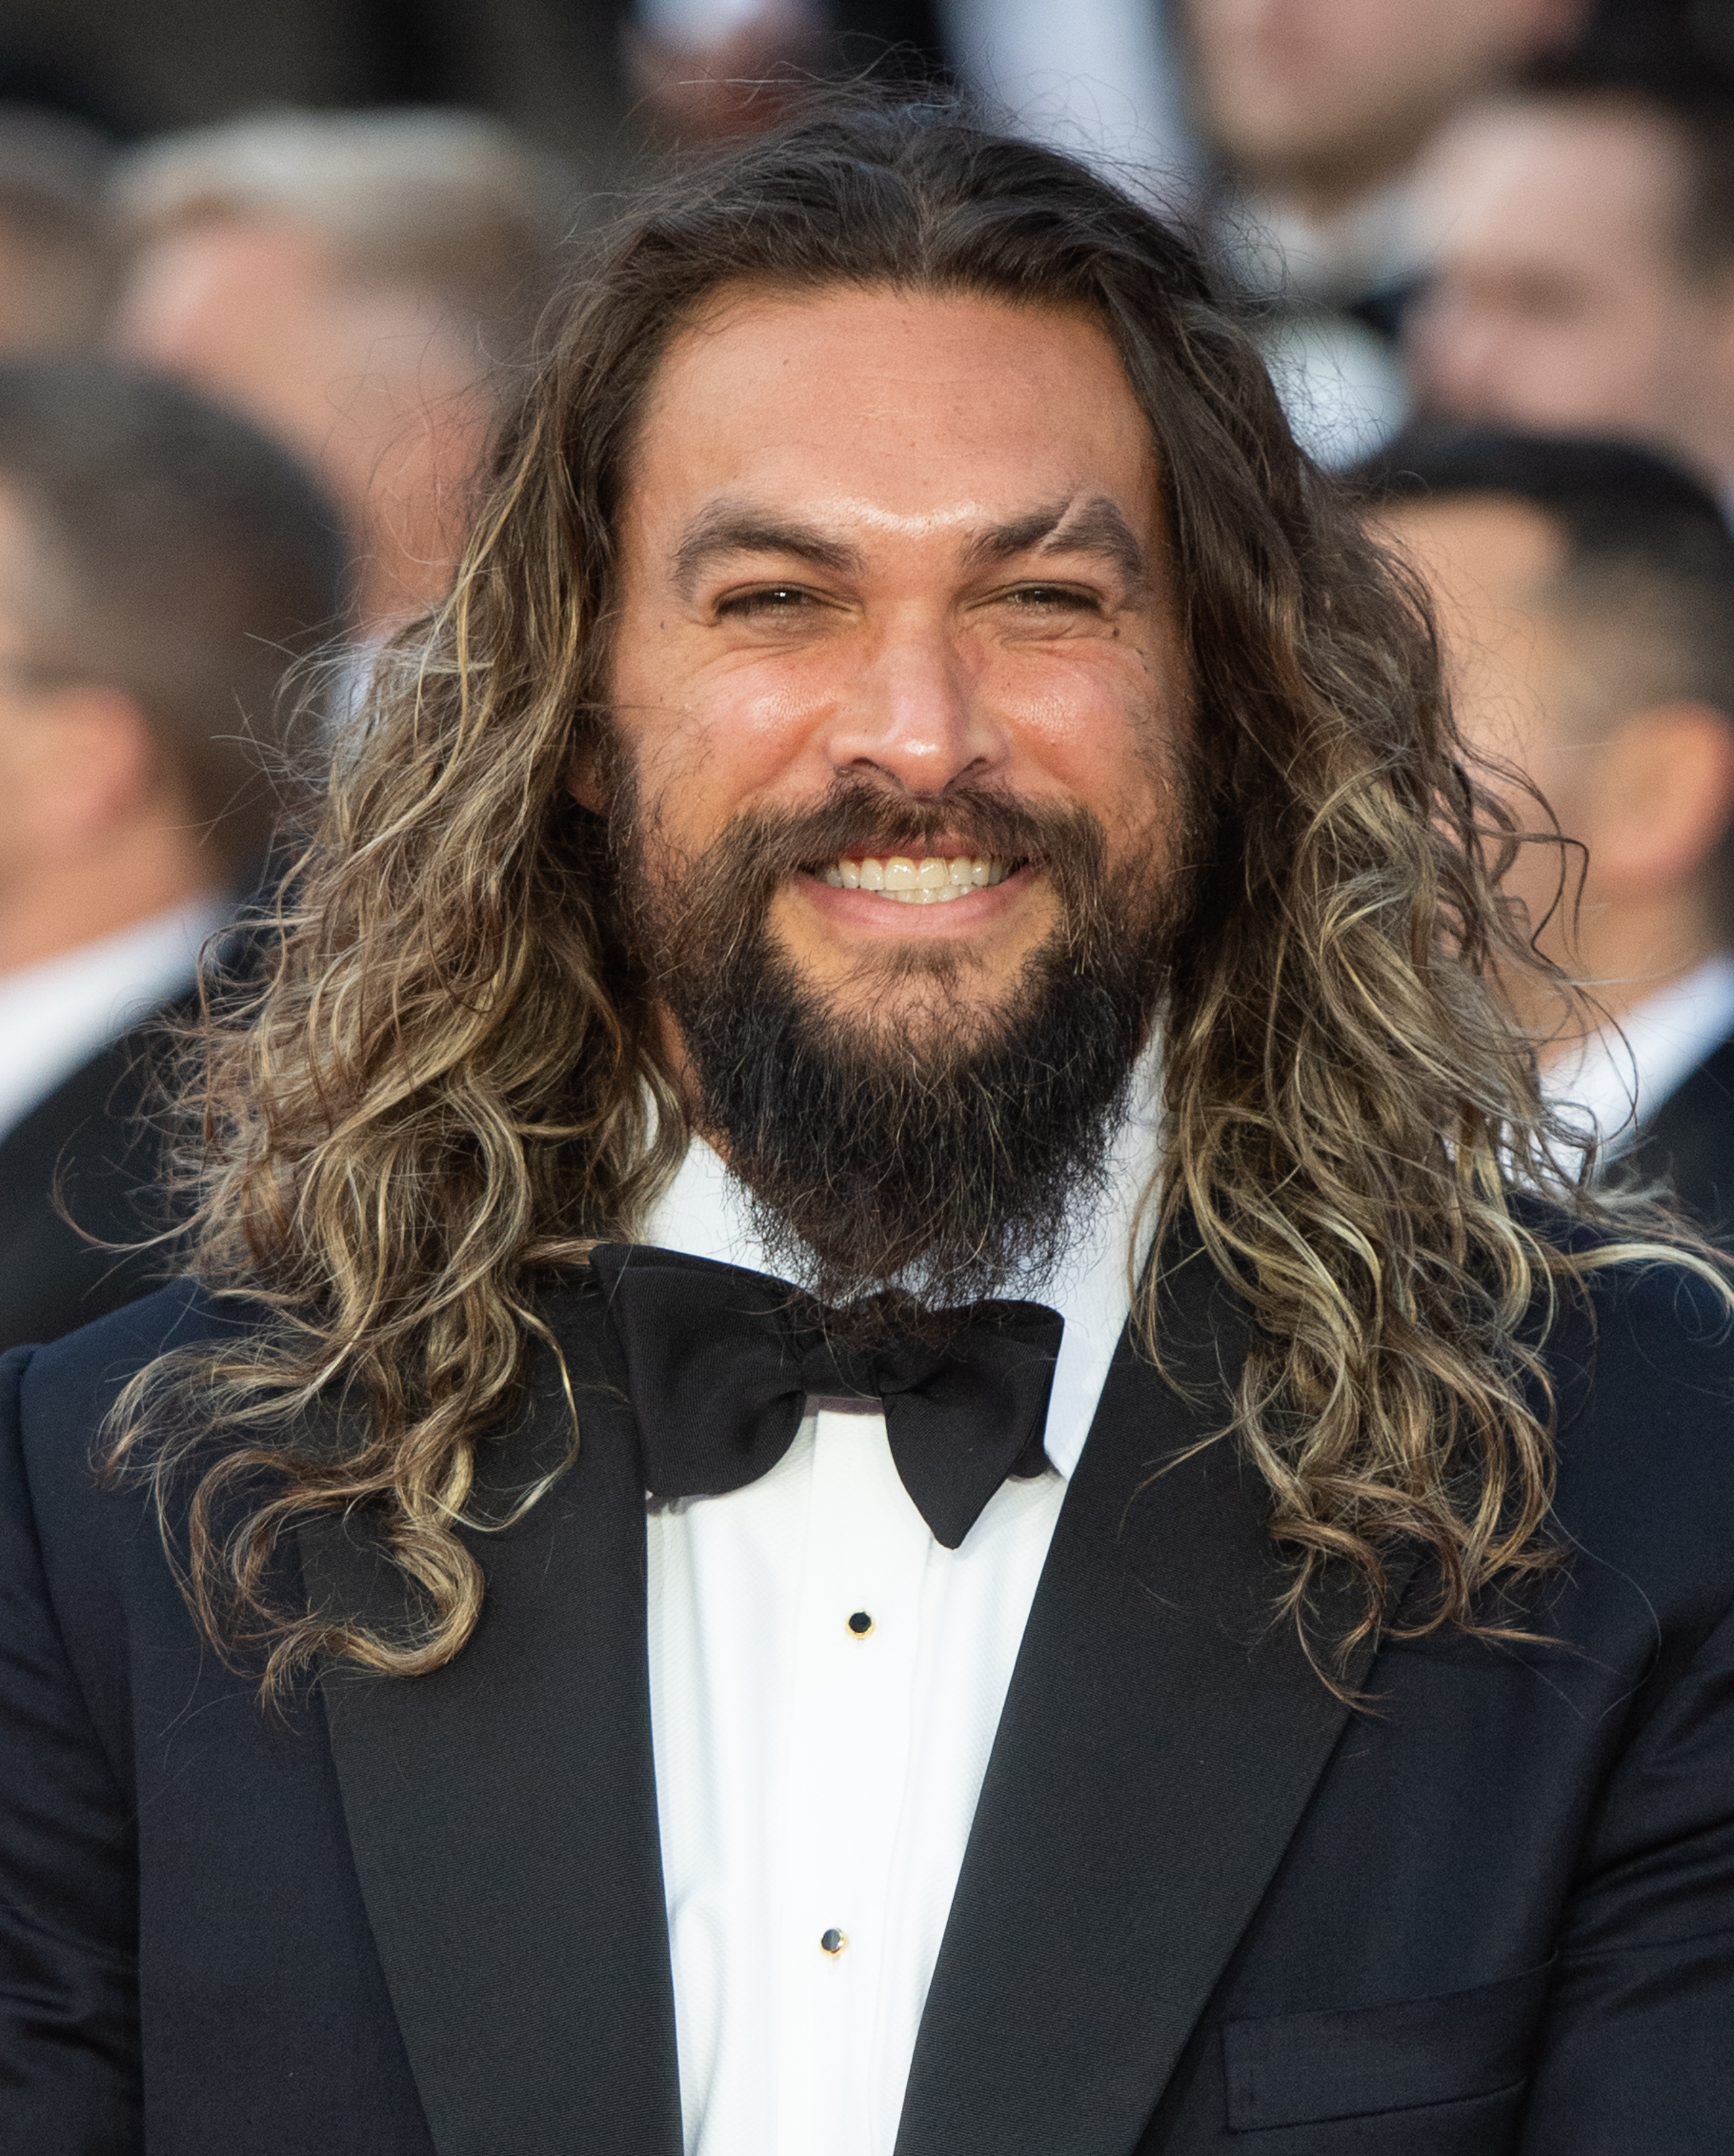 Jason Momoa attends the "No Time To Die" world premiere at the Royal Albert Hall on September 28, 2021, in London, England. | Source: Getty Images